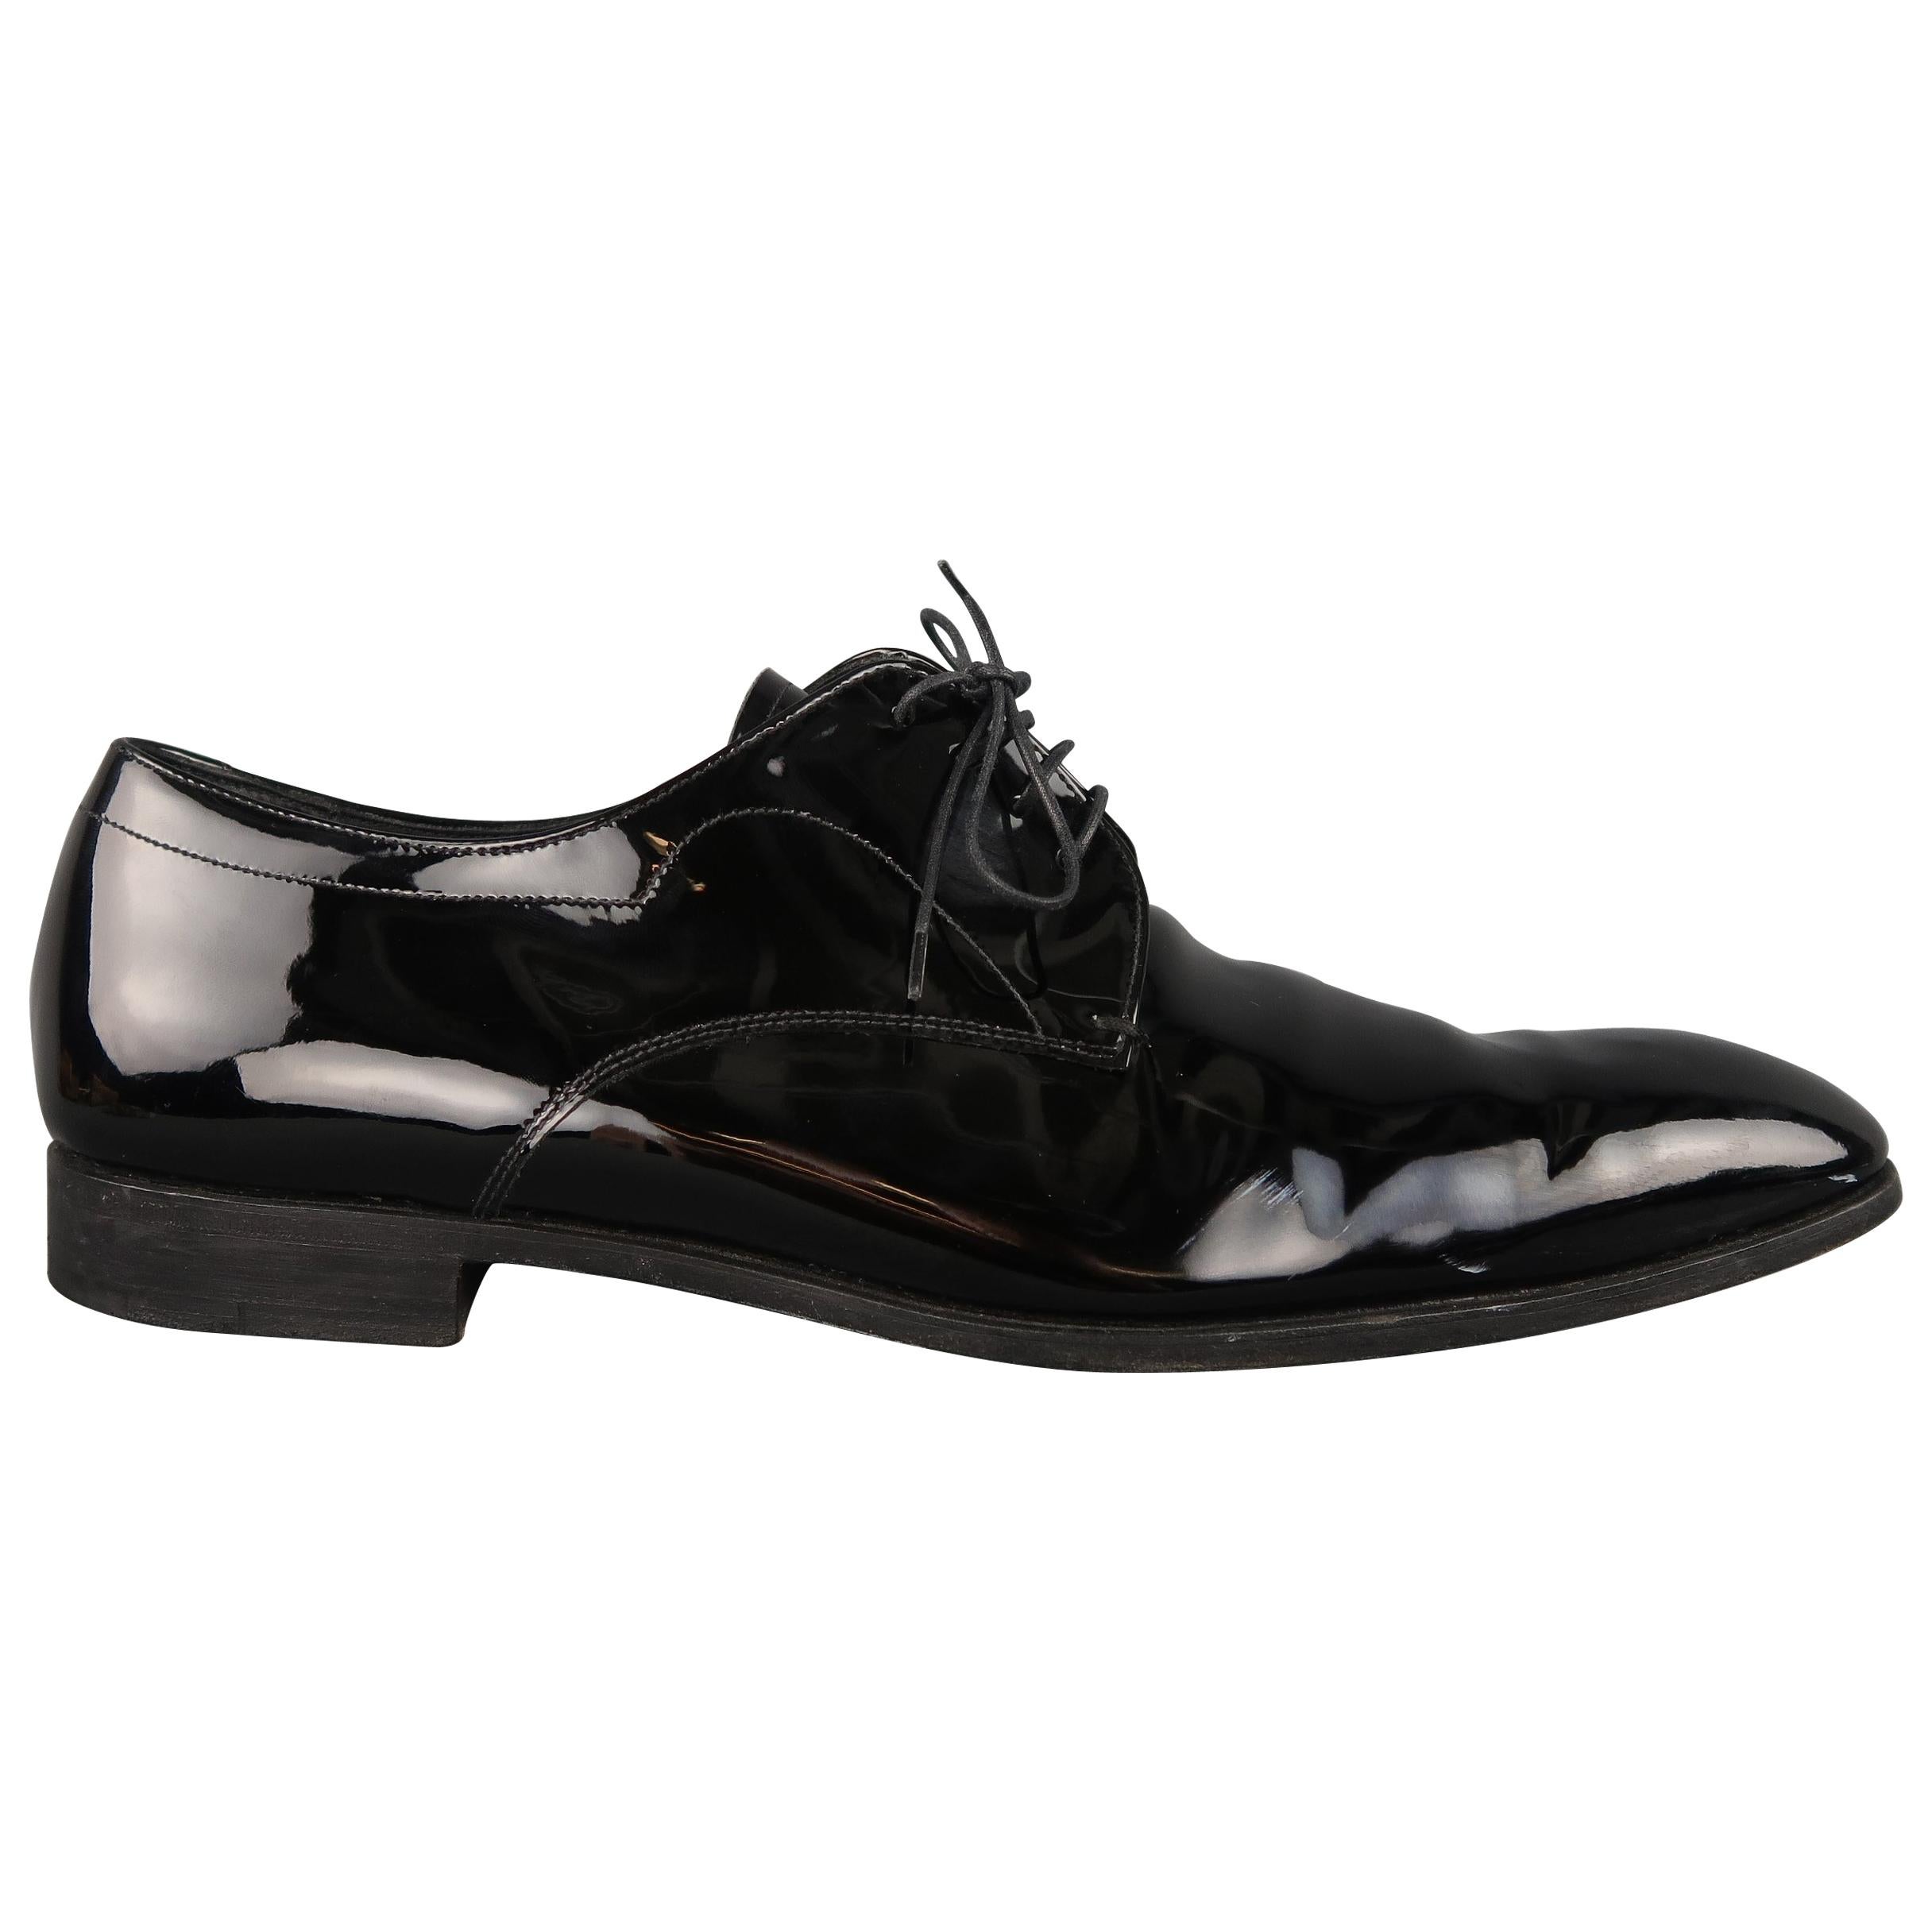 Prada Black Patent Leather Tapered Toe Lace Up Dress Shoes